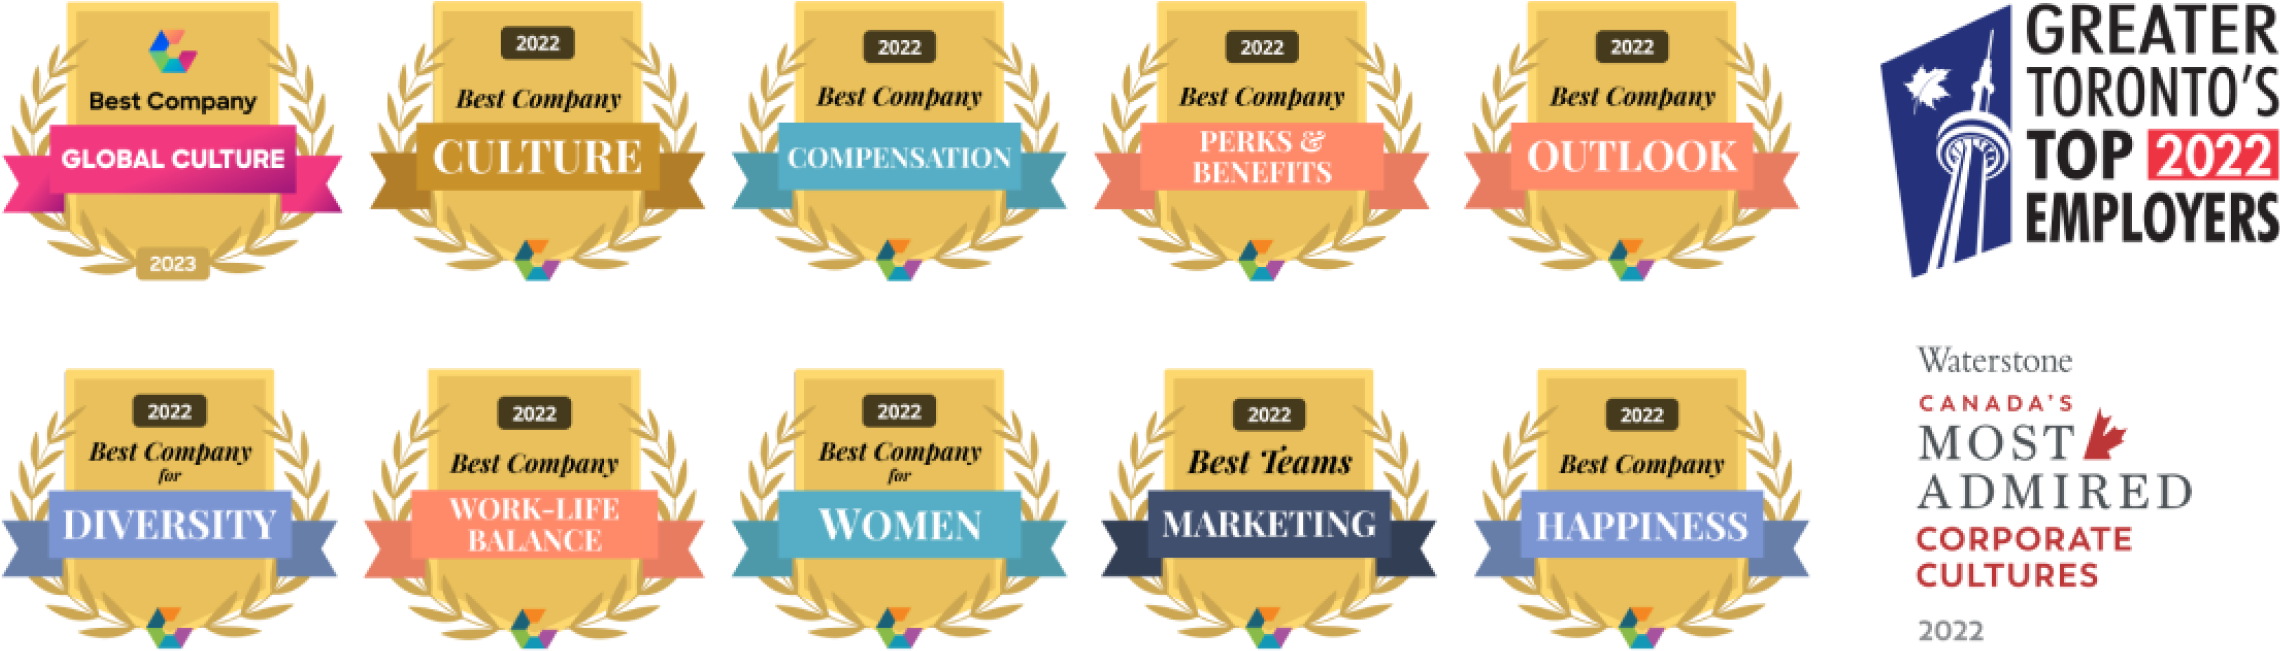 A graphic featuring several of the Awards Vena won, described in detail below.